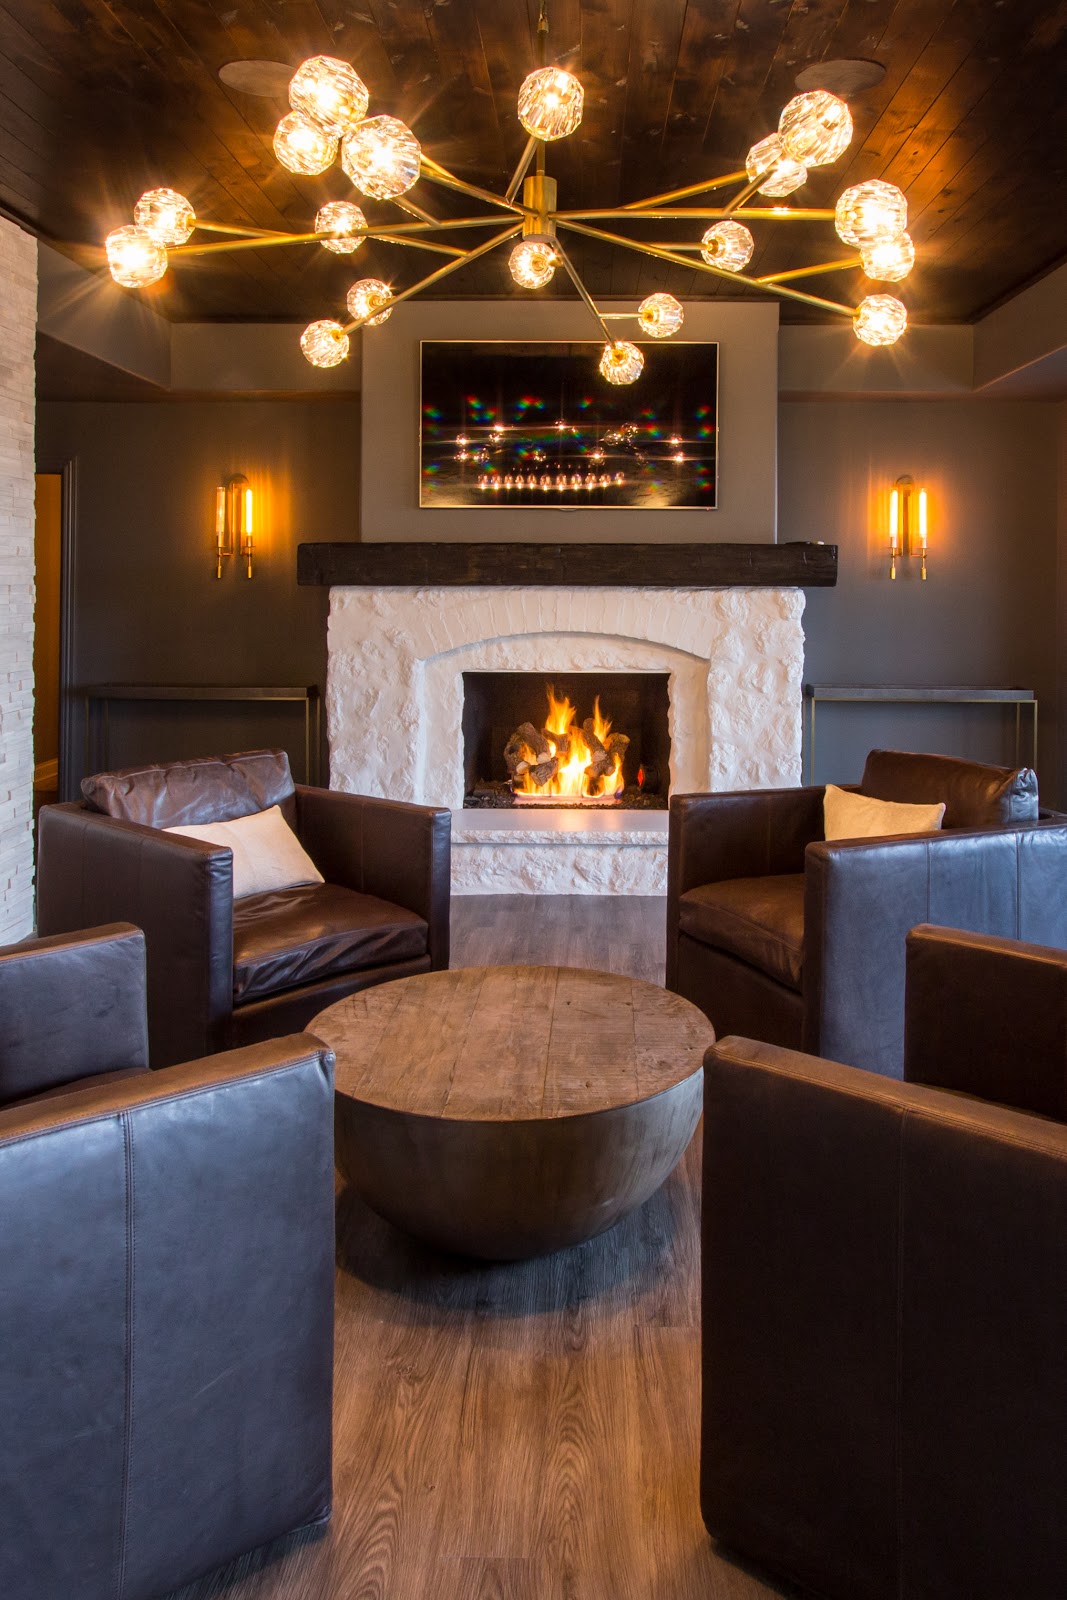 Cozy fireplace setting with leather chairs set for conversation around a weathered wood coffee table, featuring warm lighting with modern star fixture and wall sconces